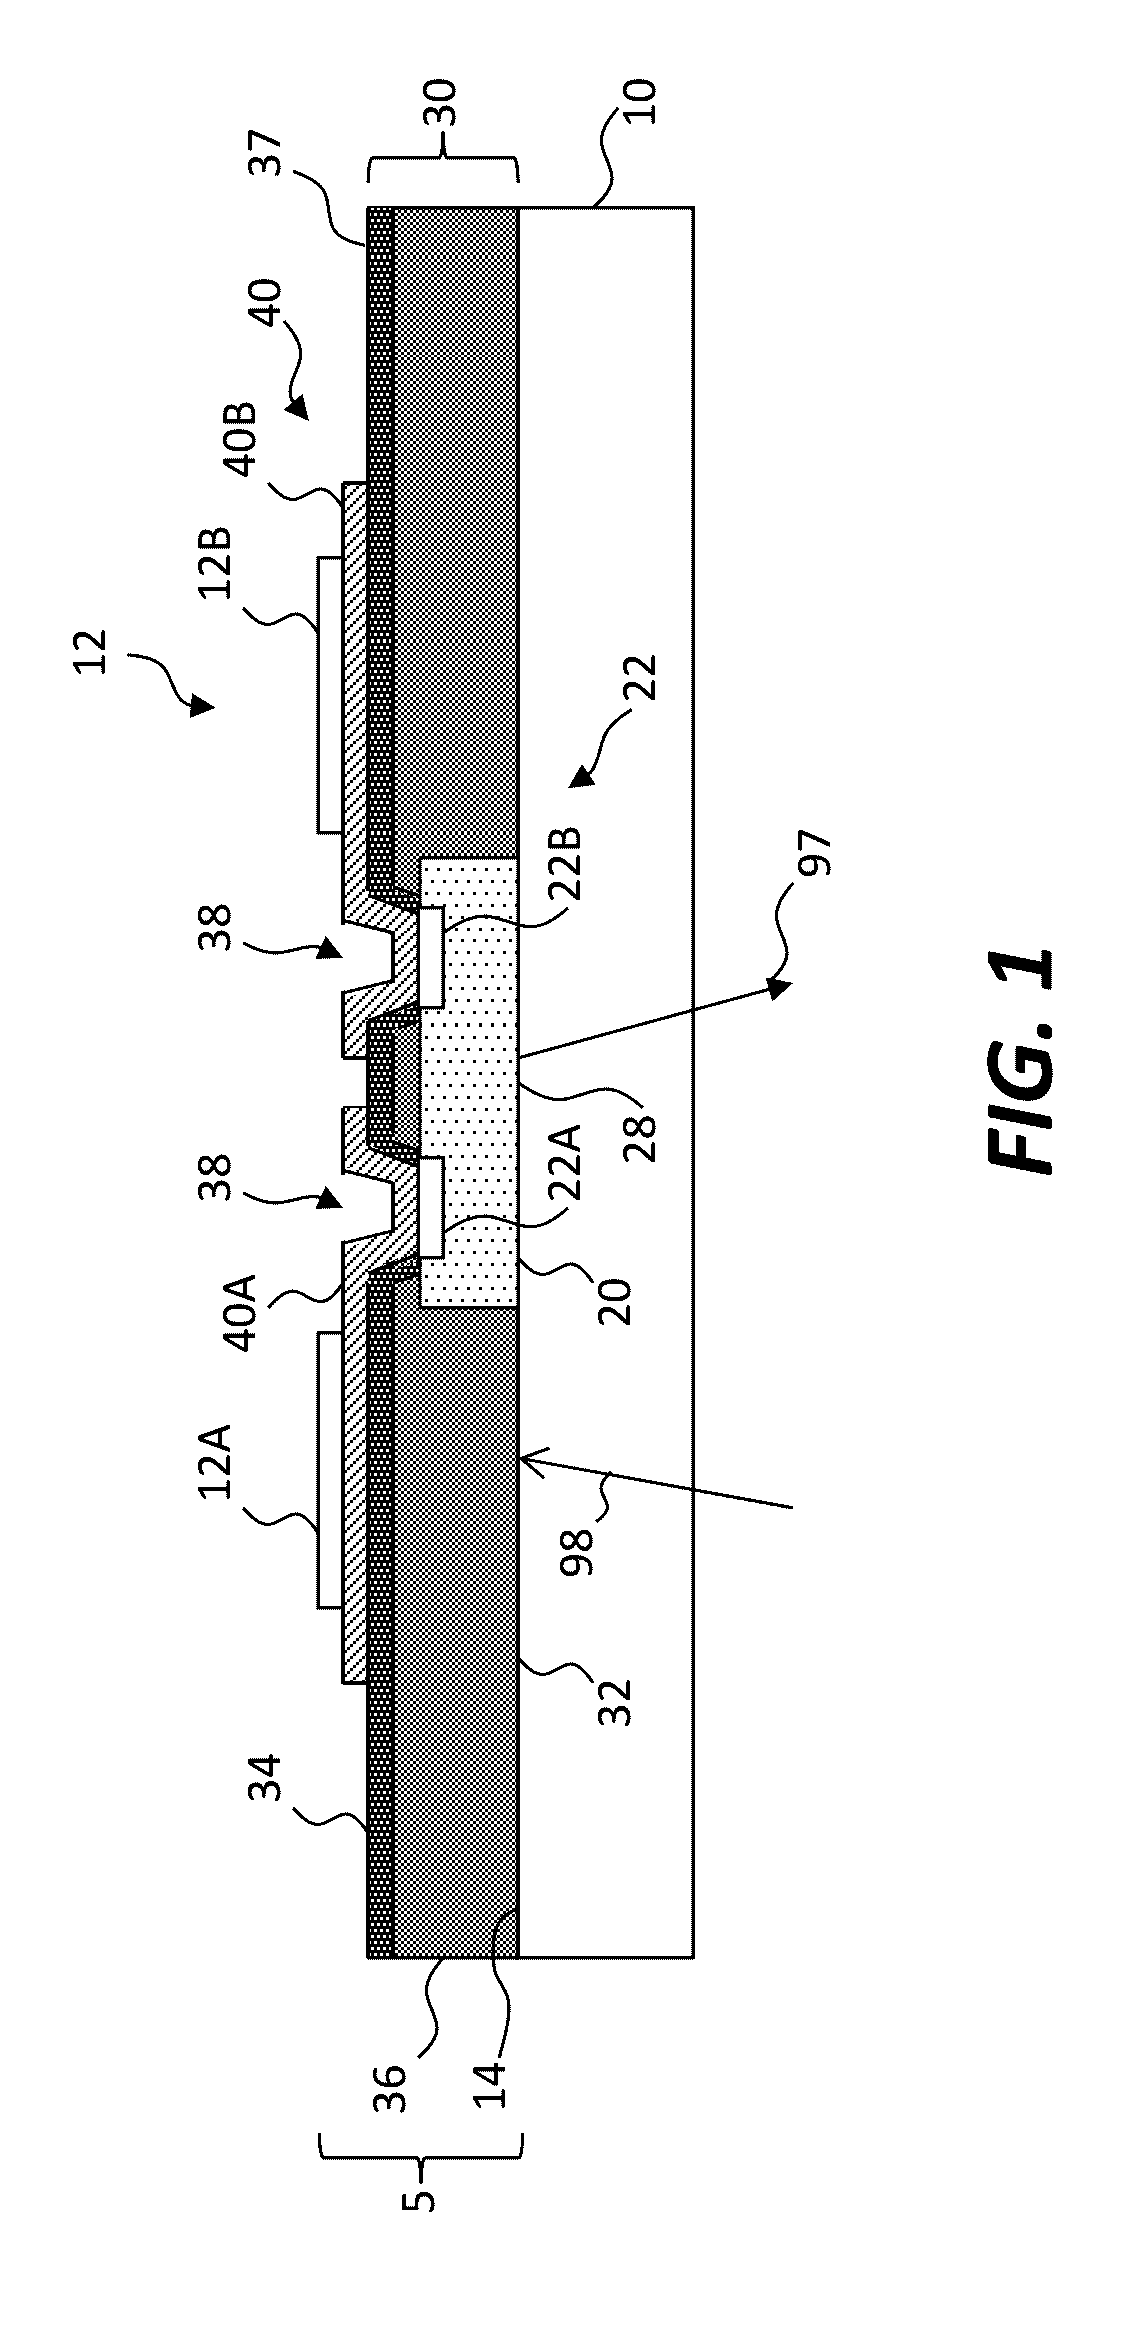 Display tile structure and tiled display